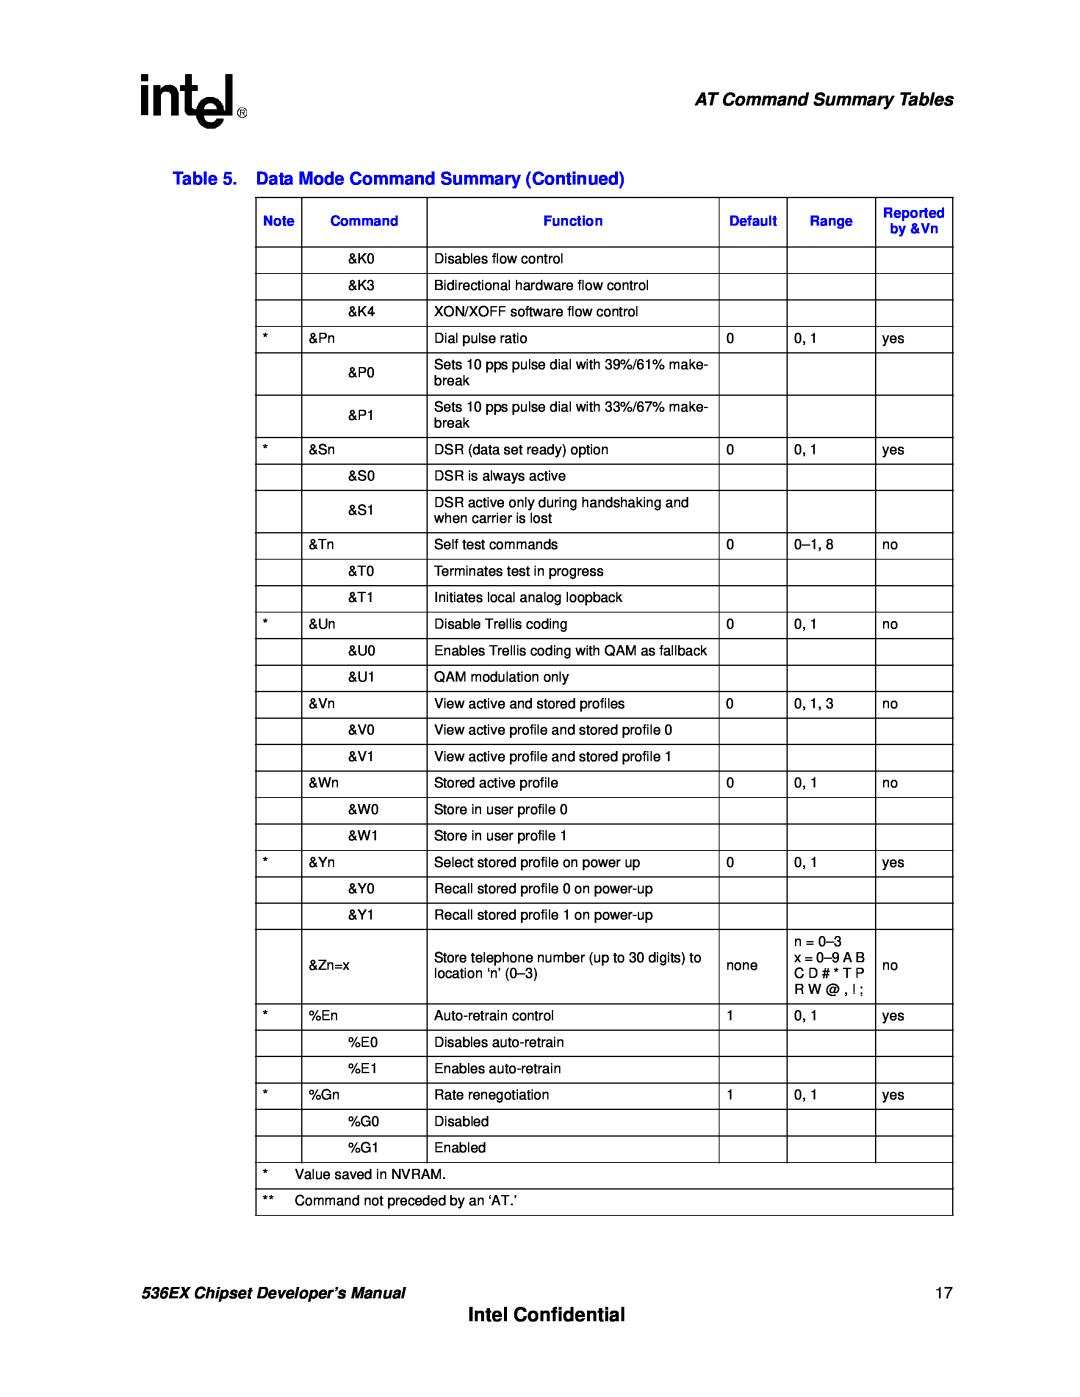 Intel 536EX manual Intel Confidential, AT Command Summary Tables, Data Mode Command Summary Continued 